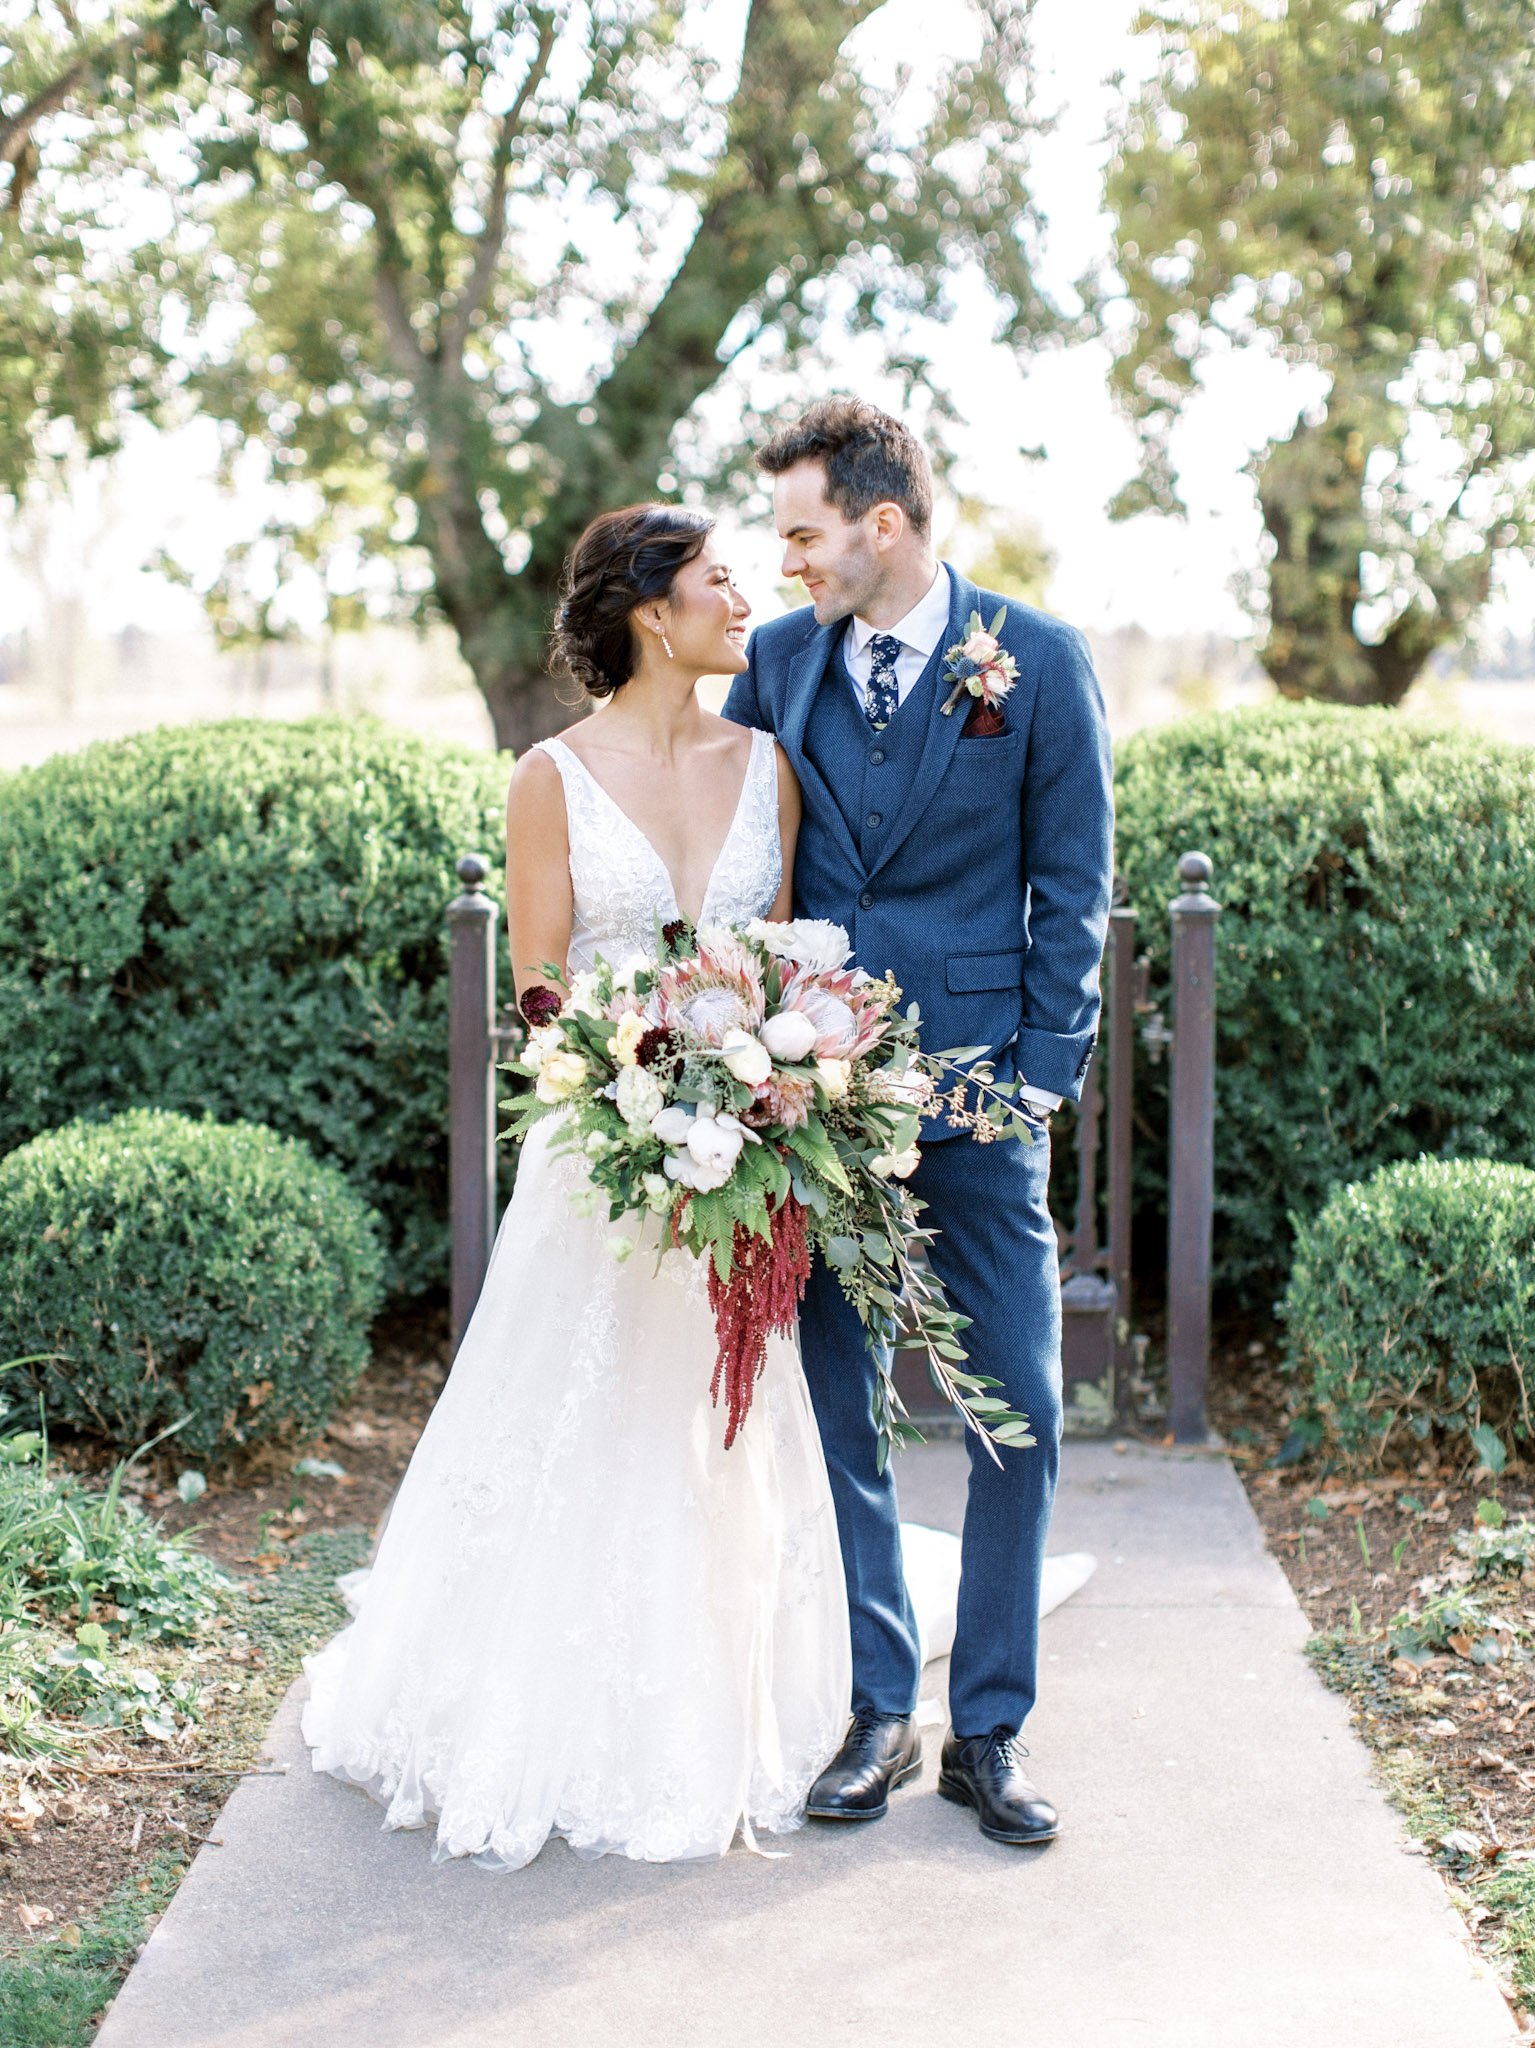 Petals and vows: Our favorite floral designs from real weddings — Park ...